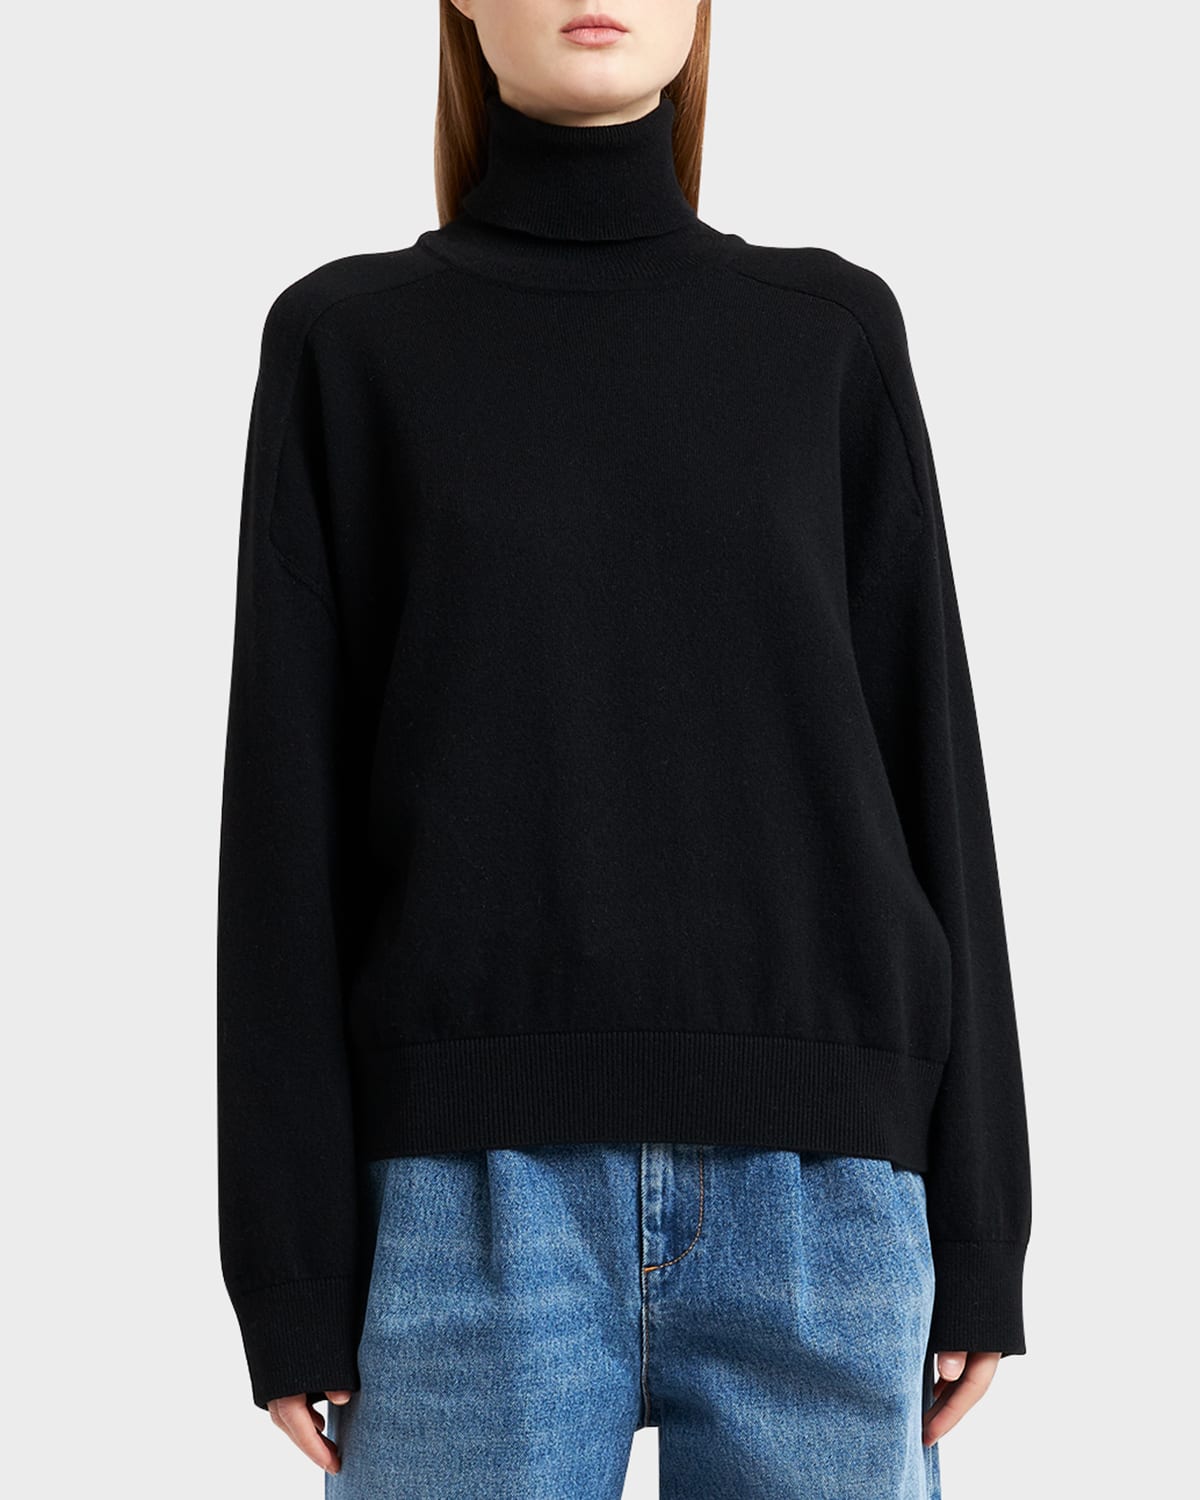 Dimitri Recycled-Cashmere Turtleneck Sweater